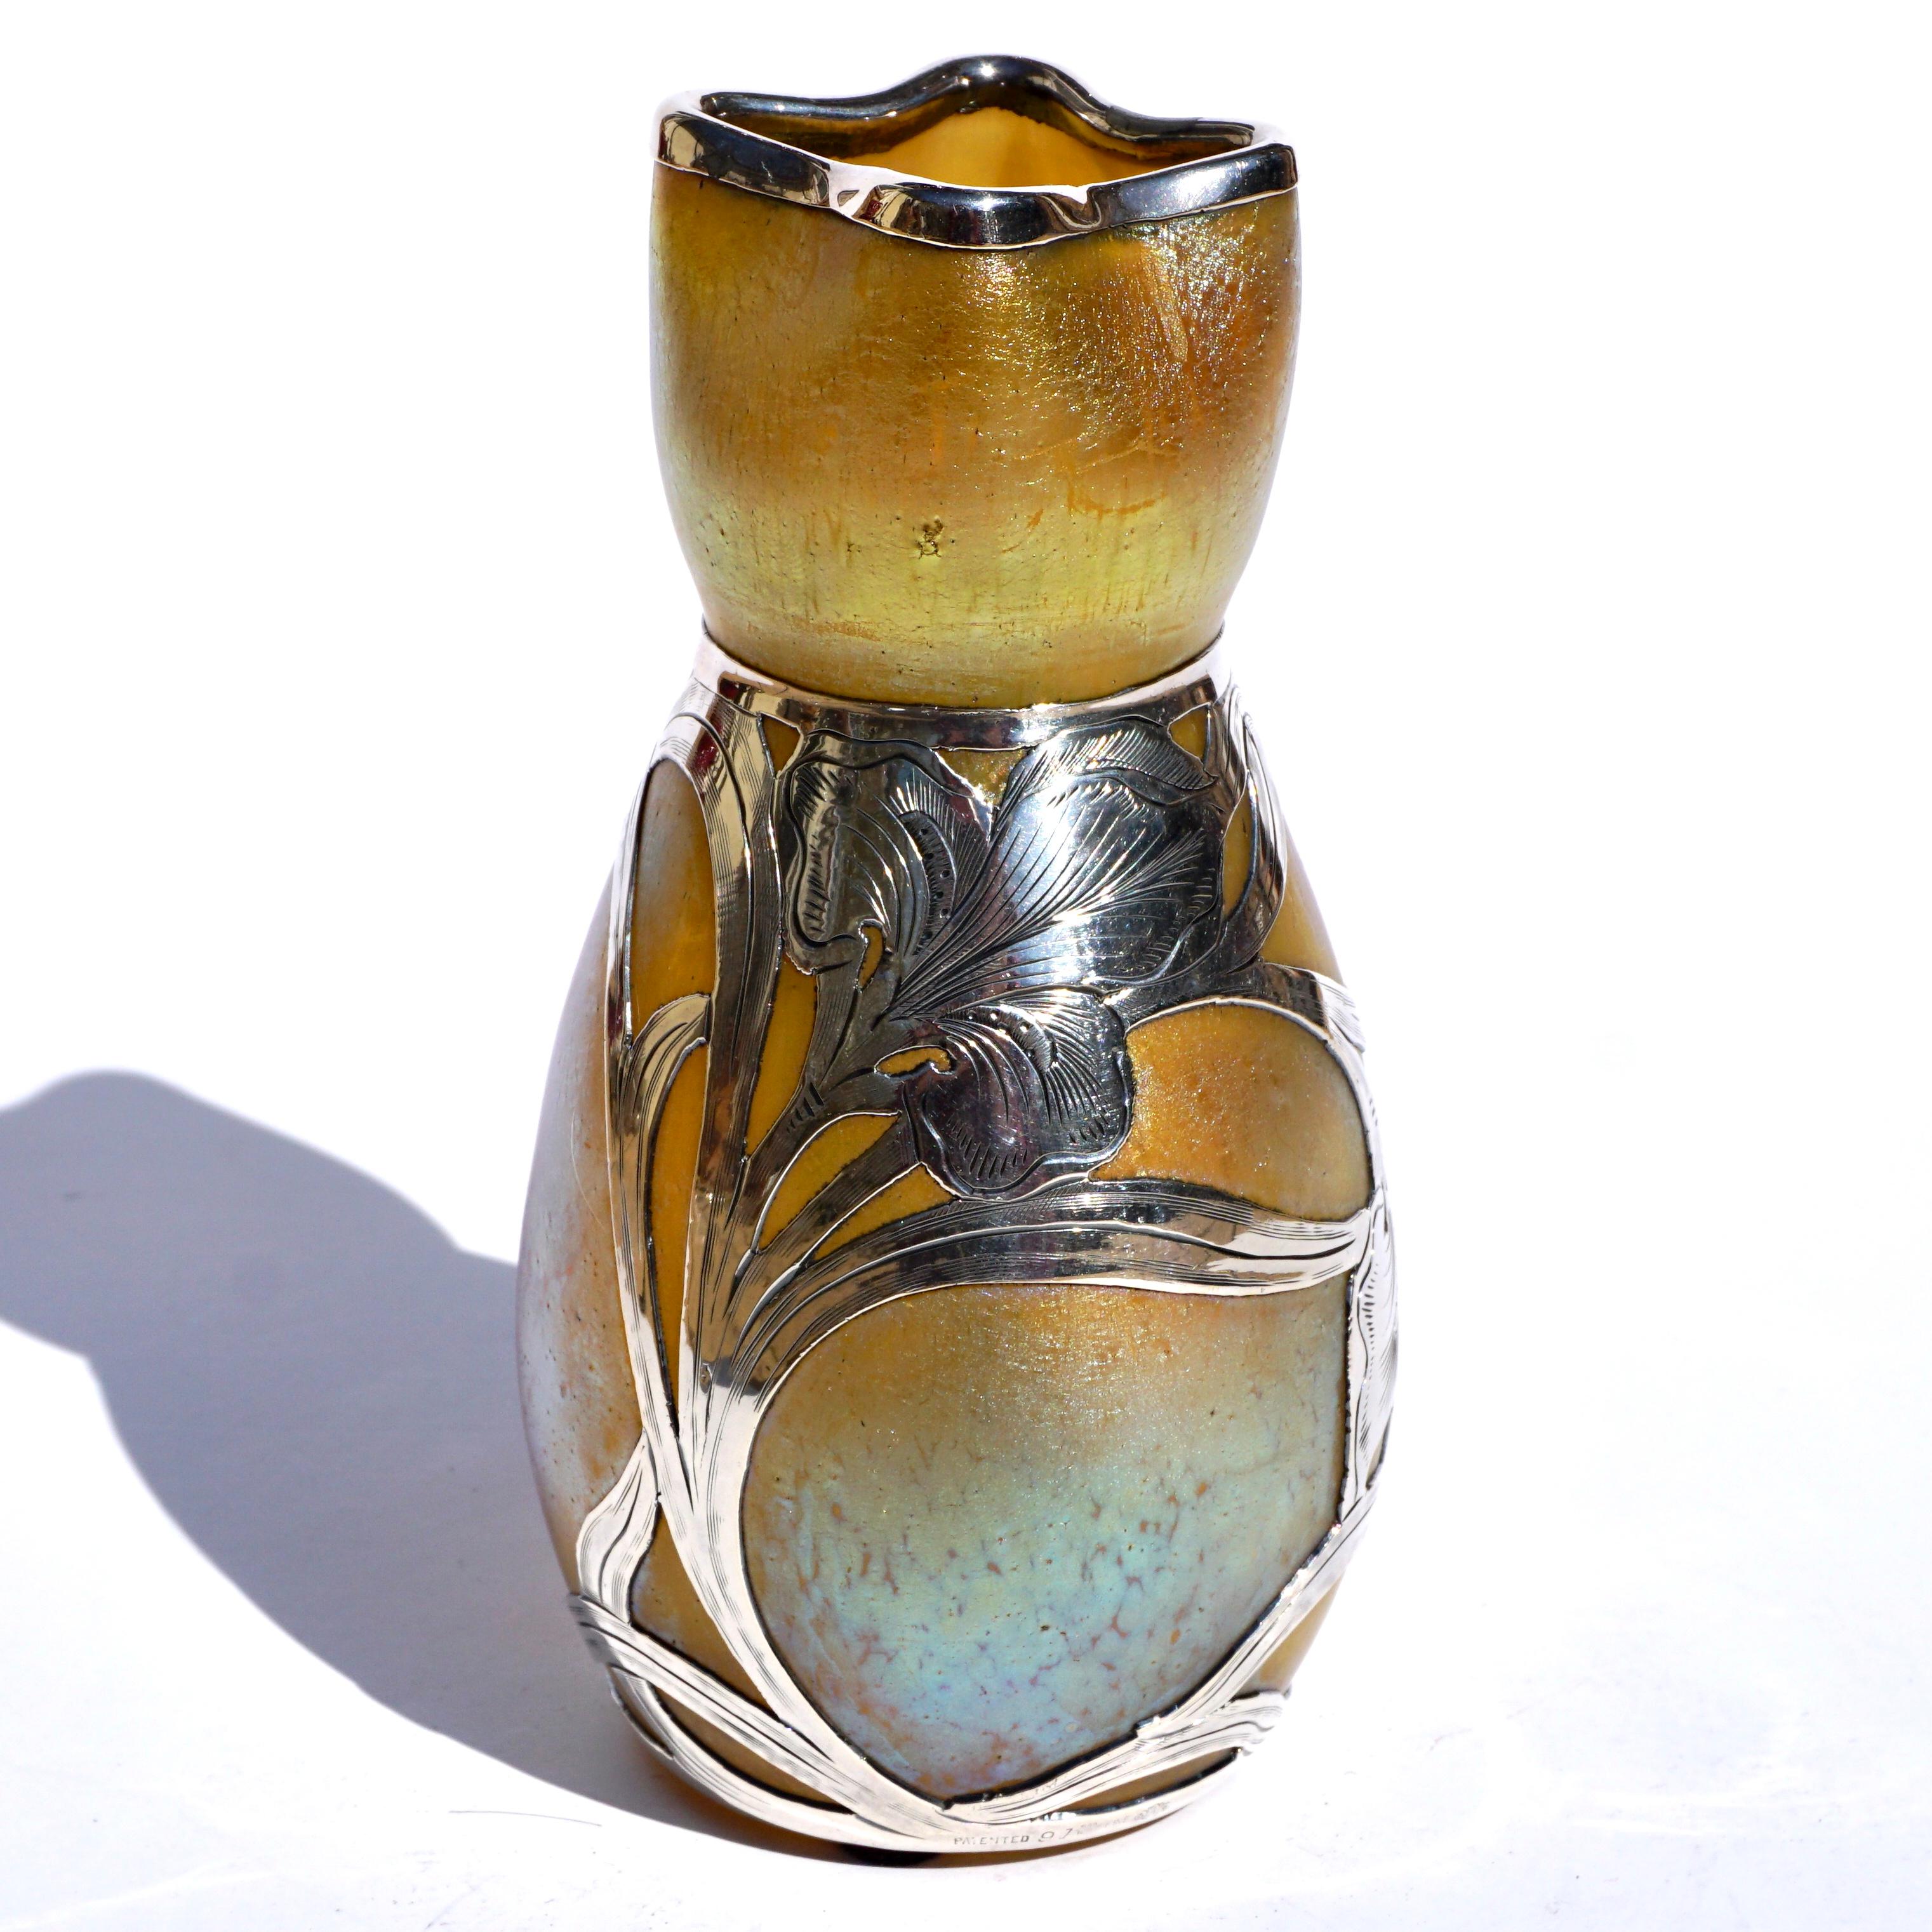 Loetz Silberiris II vase with favrile gold and blue iridescent finish. Austria Circa 1900 Art Nouveau,
Glass, sterling silver
Unmarked, numbered
Measures: Height: 5.8 Inches x 3 Inch Diameter

Mint condition, circa 1904. Silver tarnished.